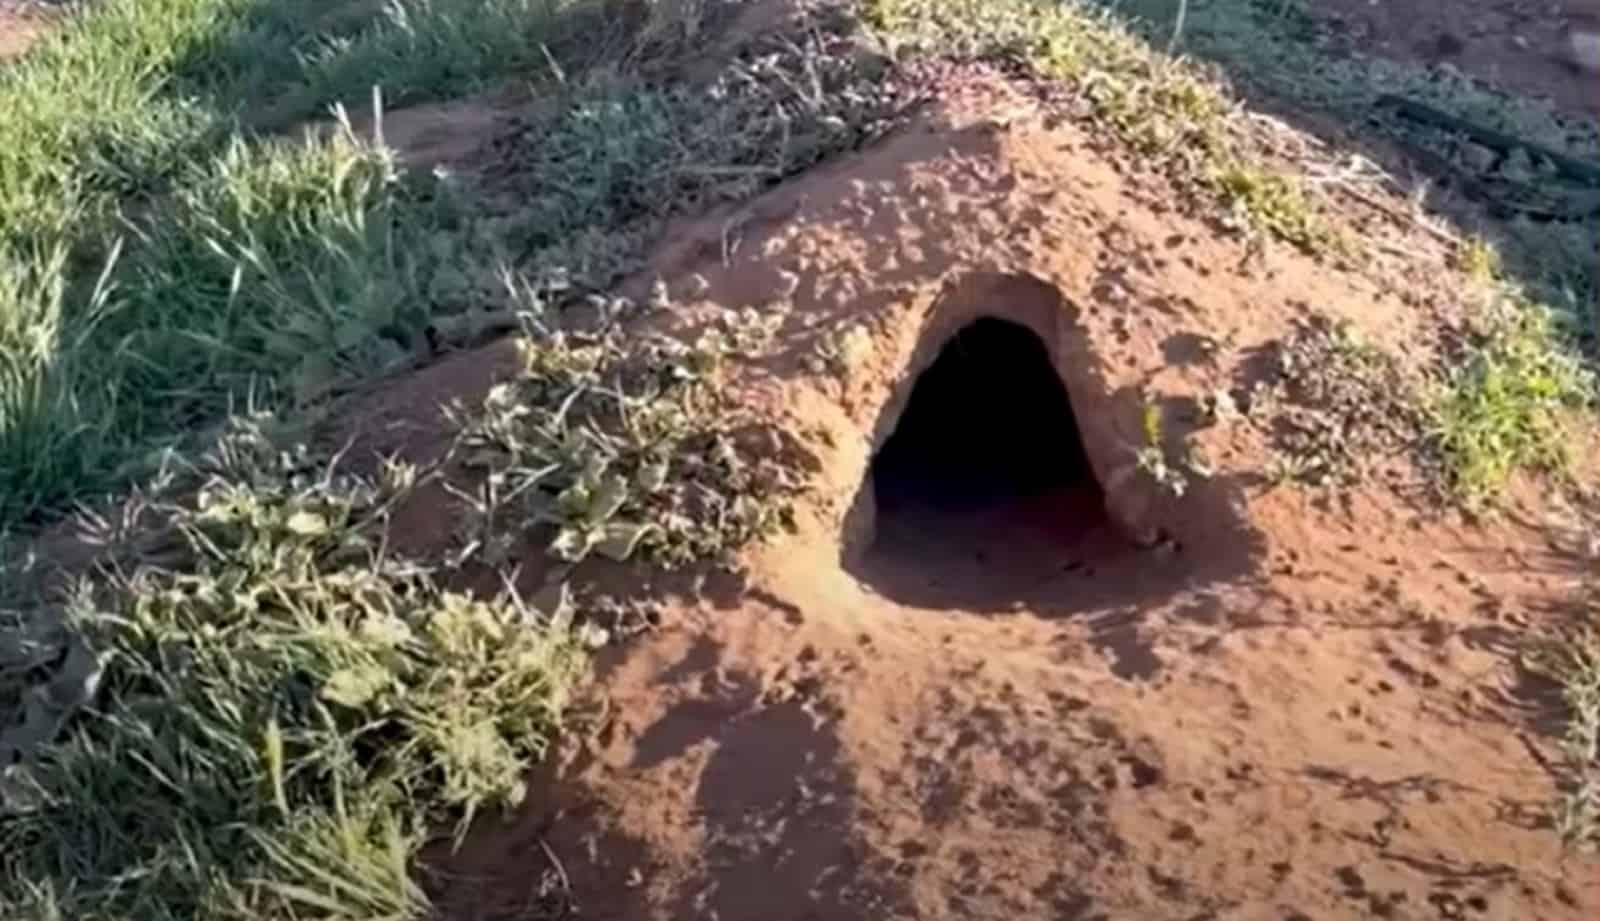 a hole in the ground in nature